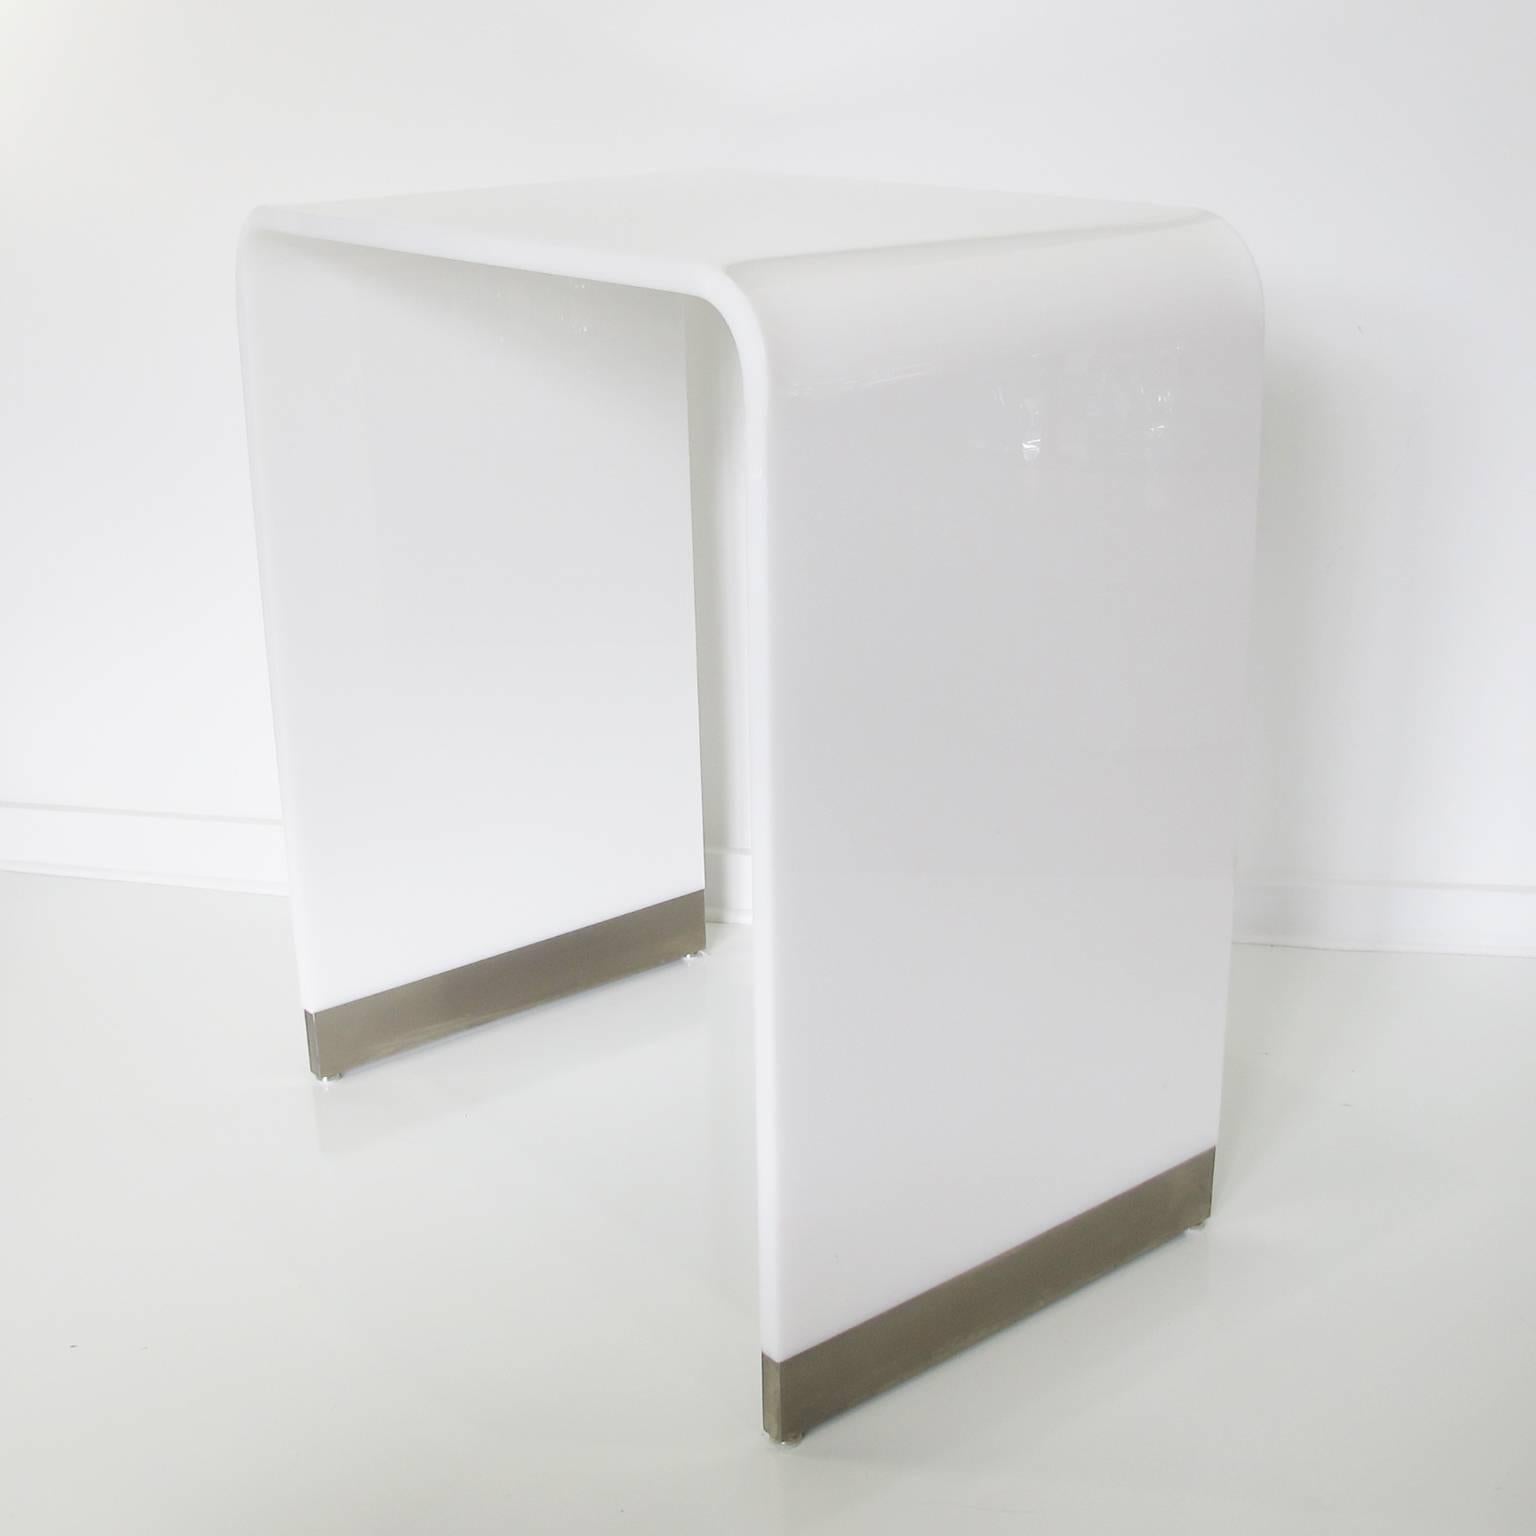 Minimalist 1980s Modernist White Acrylic Lucite Waterfall Tall Console Table